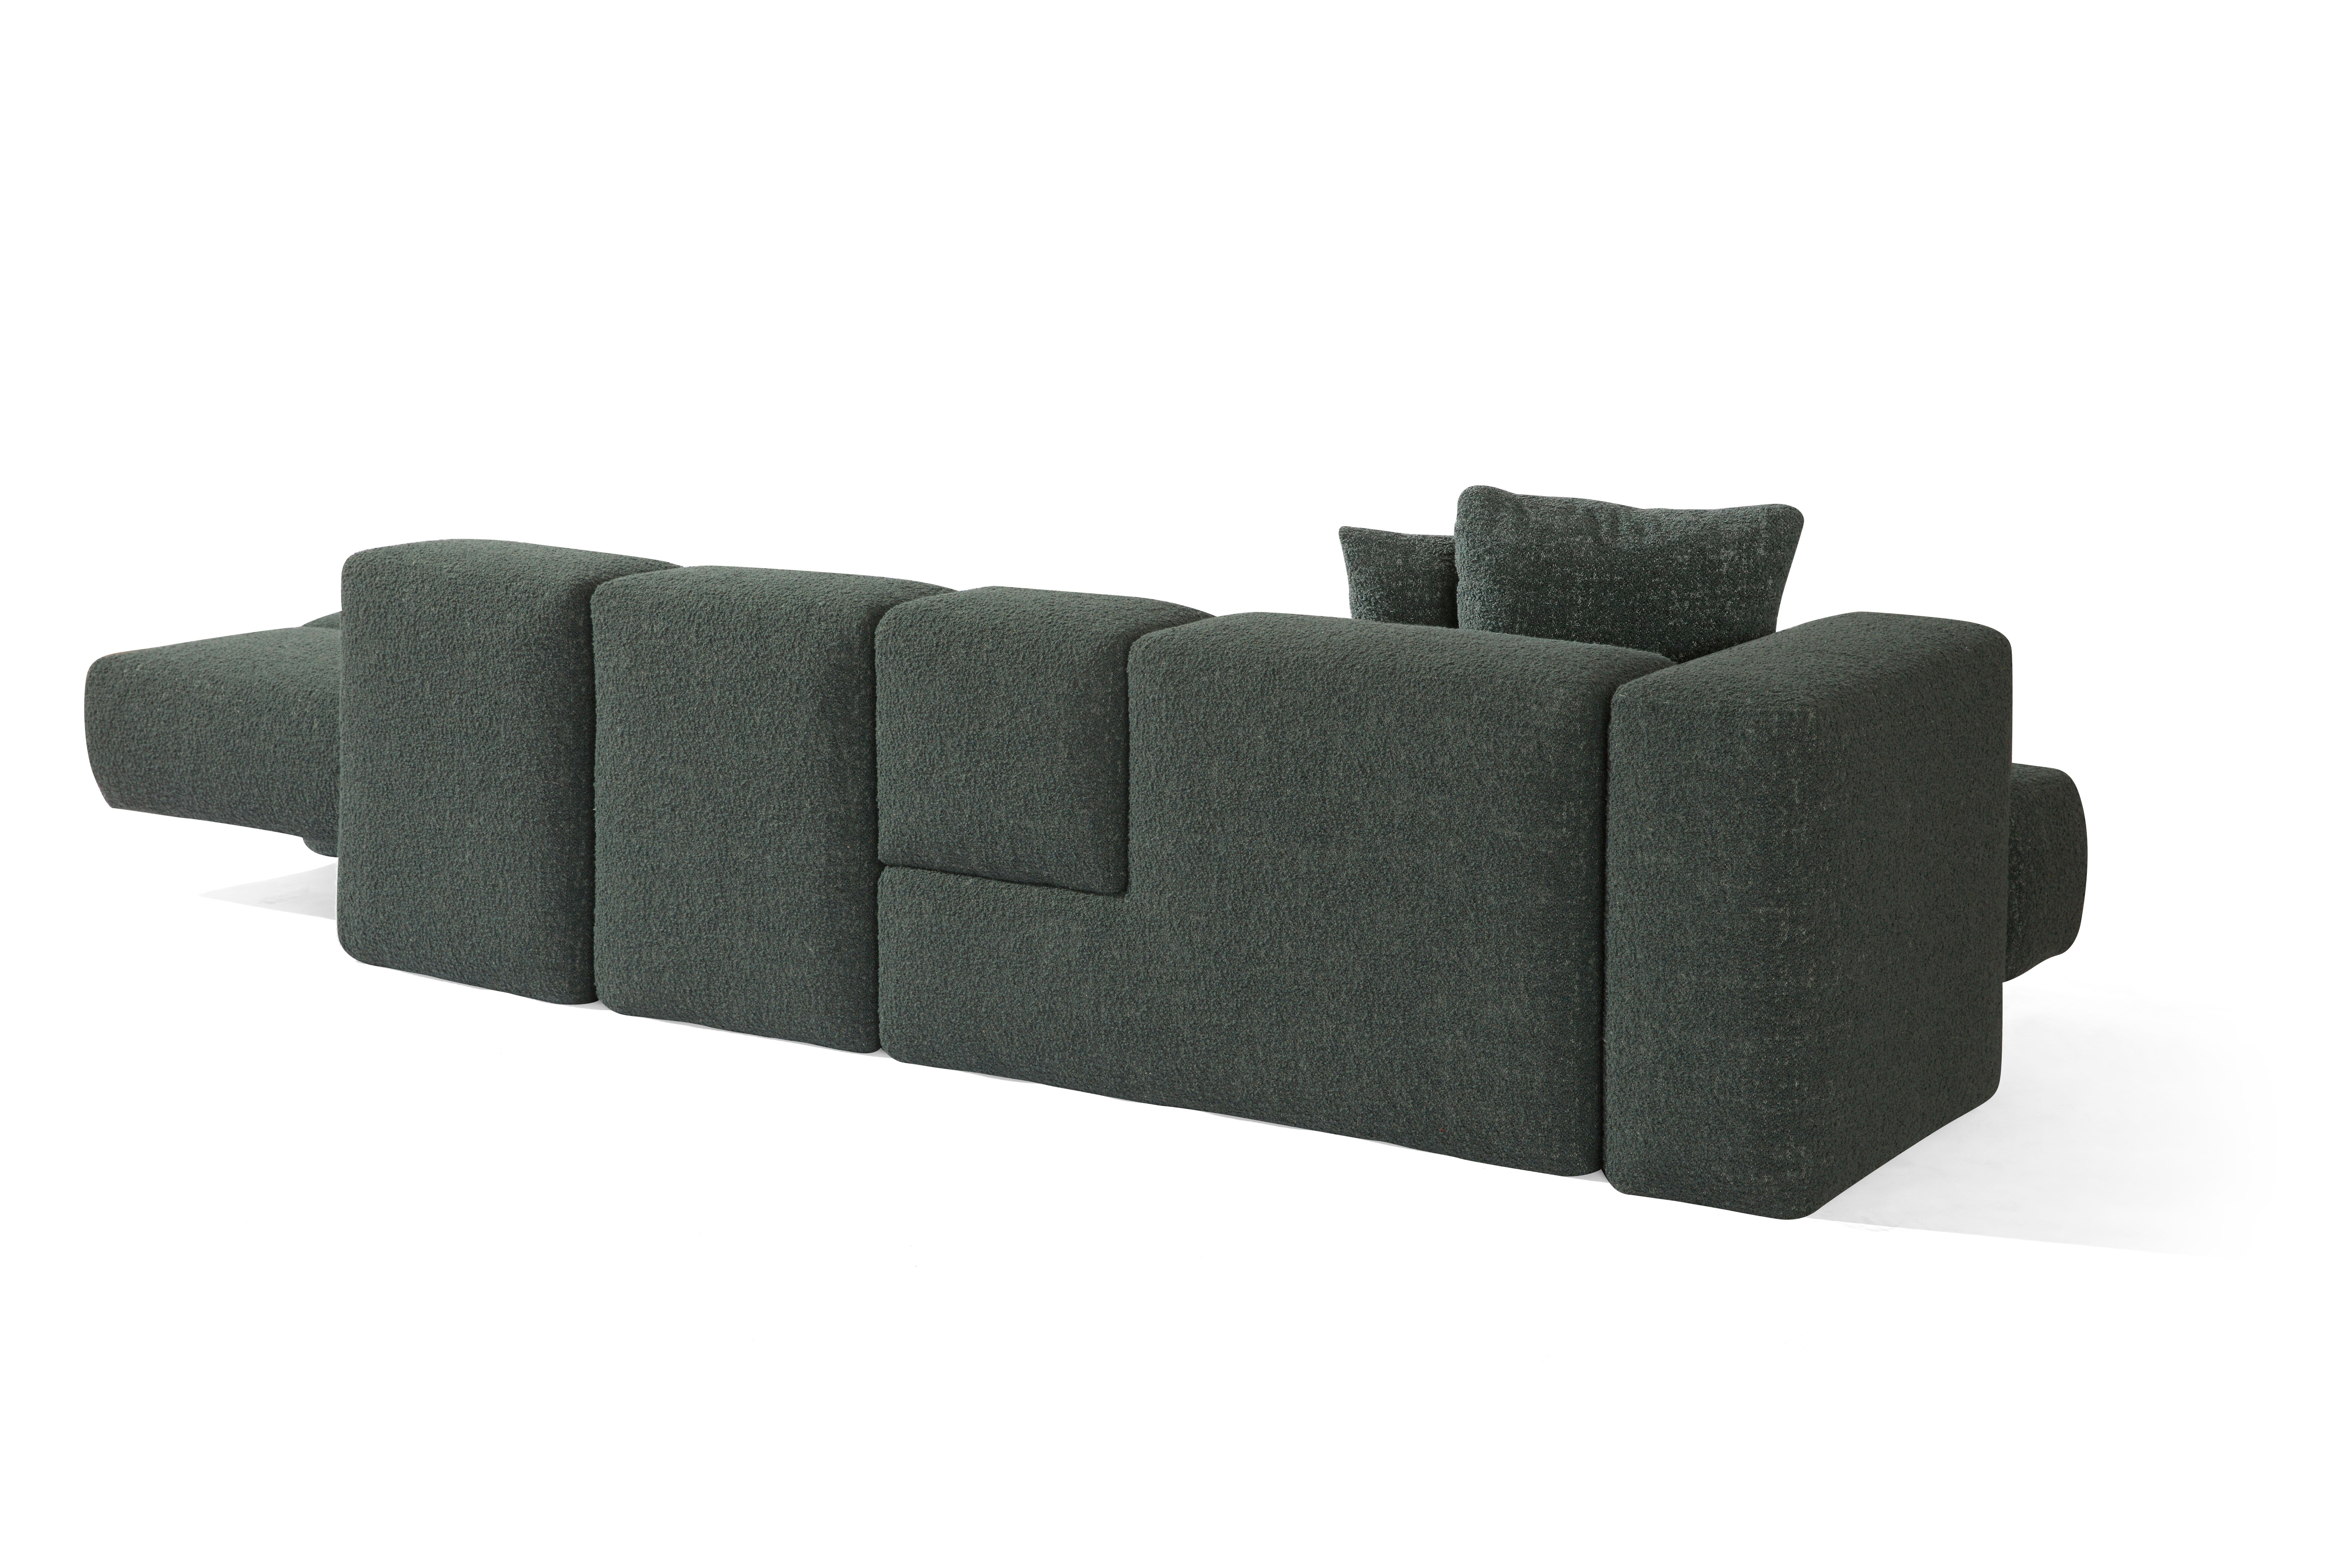 The three seater modular sofa is distinguished by different compositions that characterized every single module. The movement created by the different shapes of the modules makes the sofa a unique and versatile piece adaptable to any environment.